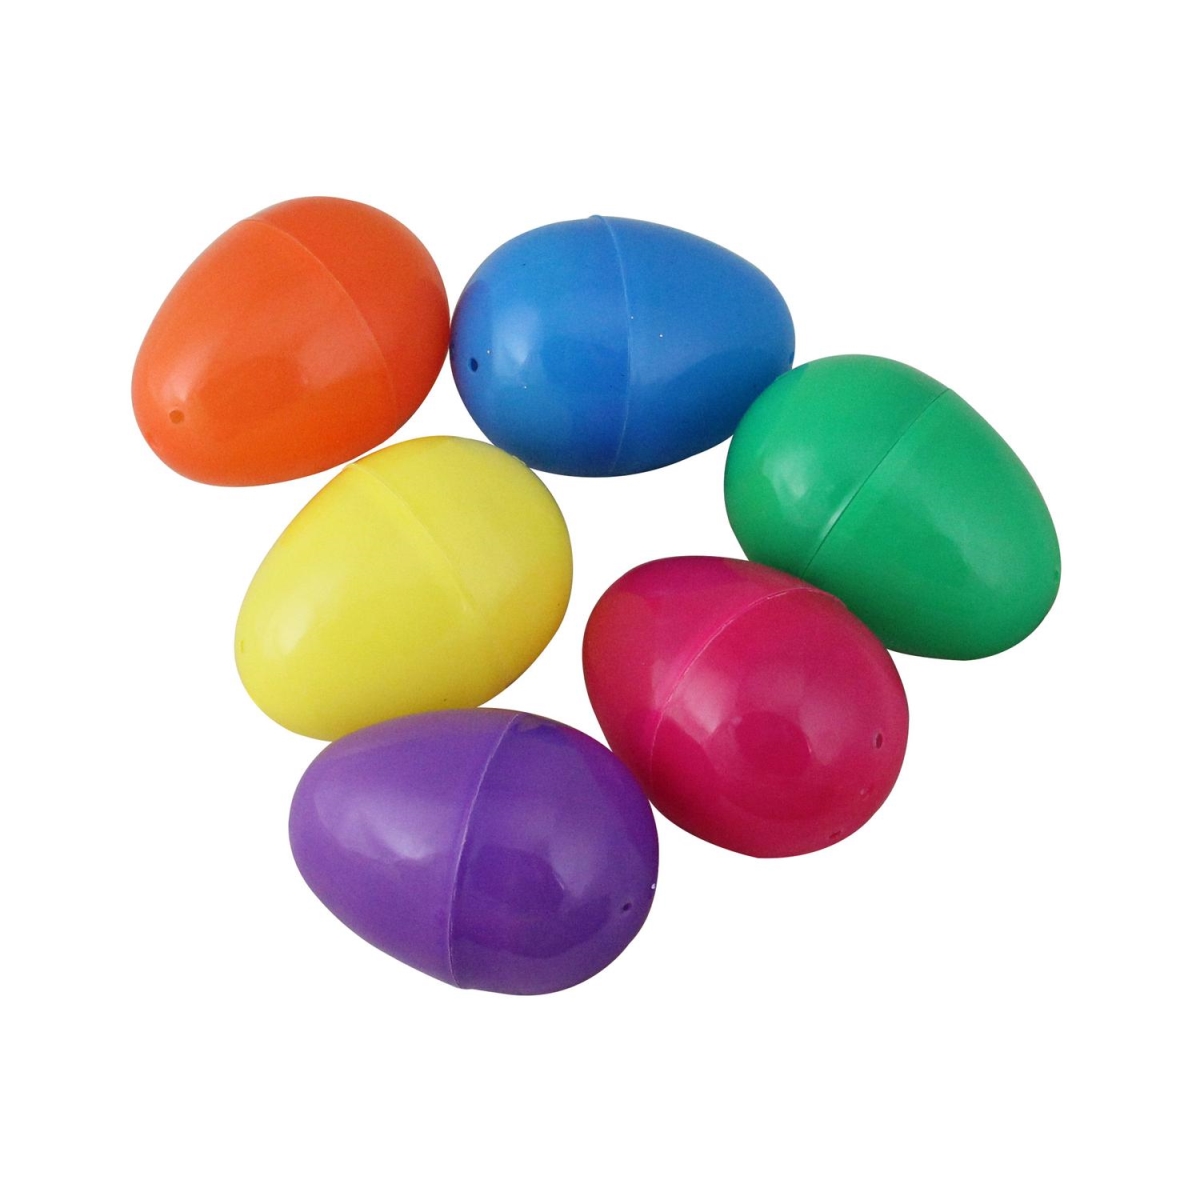 Picture of Northlight 32733357 2.5 in. 60 Count Springtime Solid Colorful Small Pop Open Easter Egg Decorations